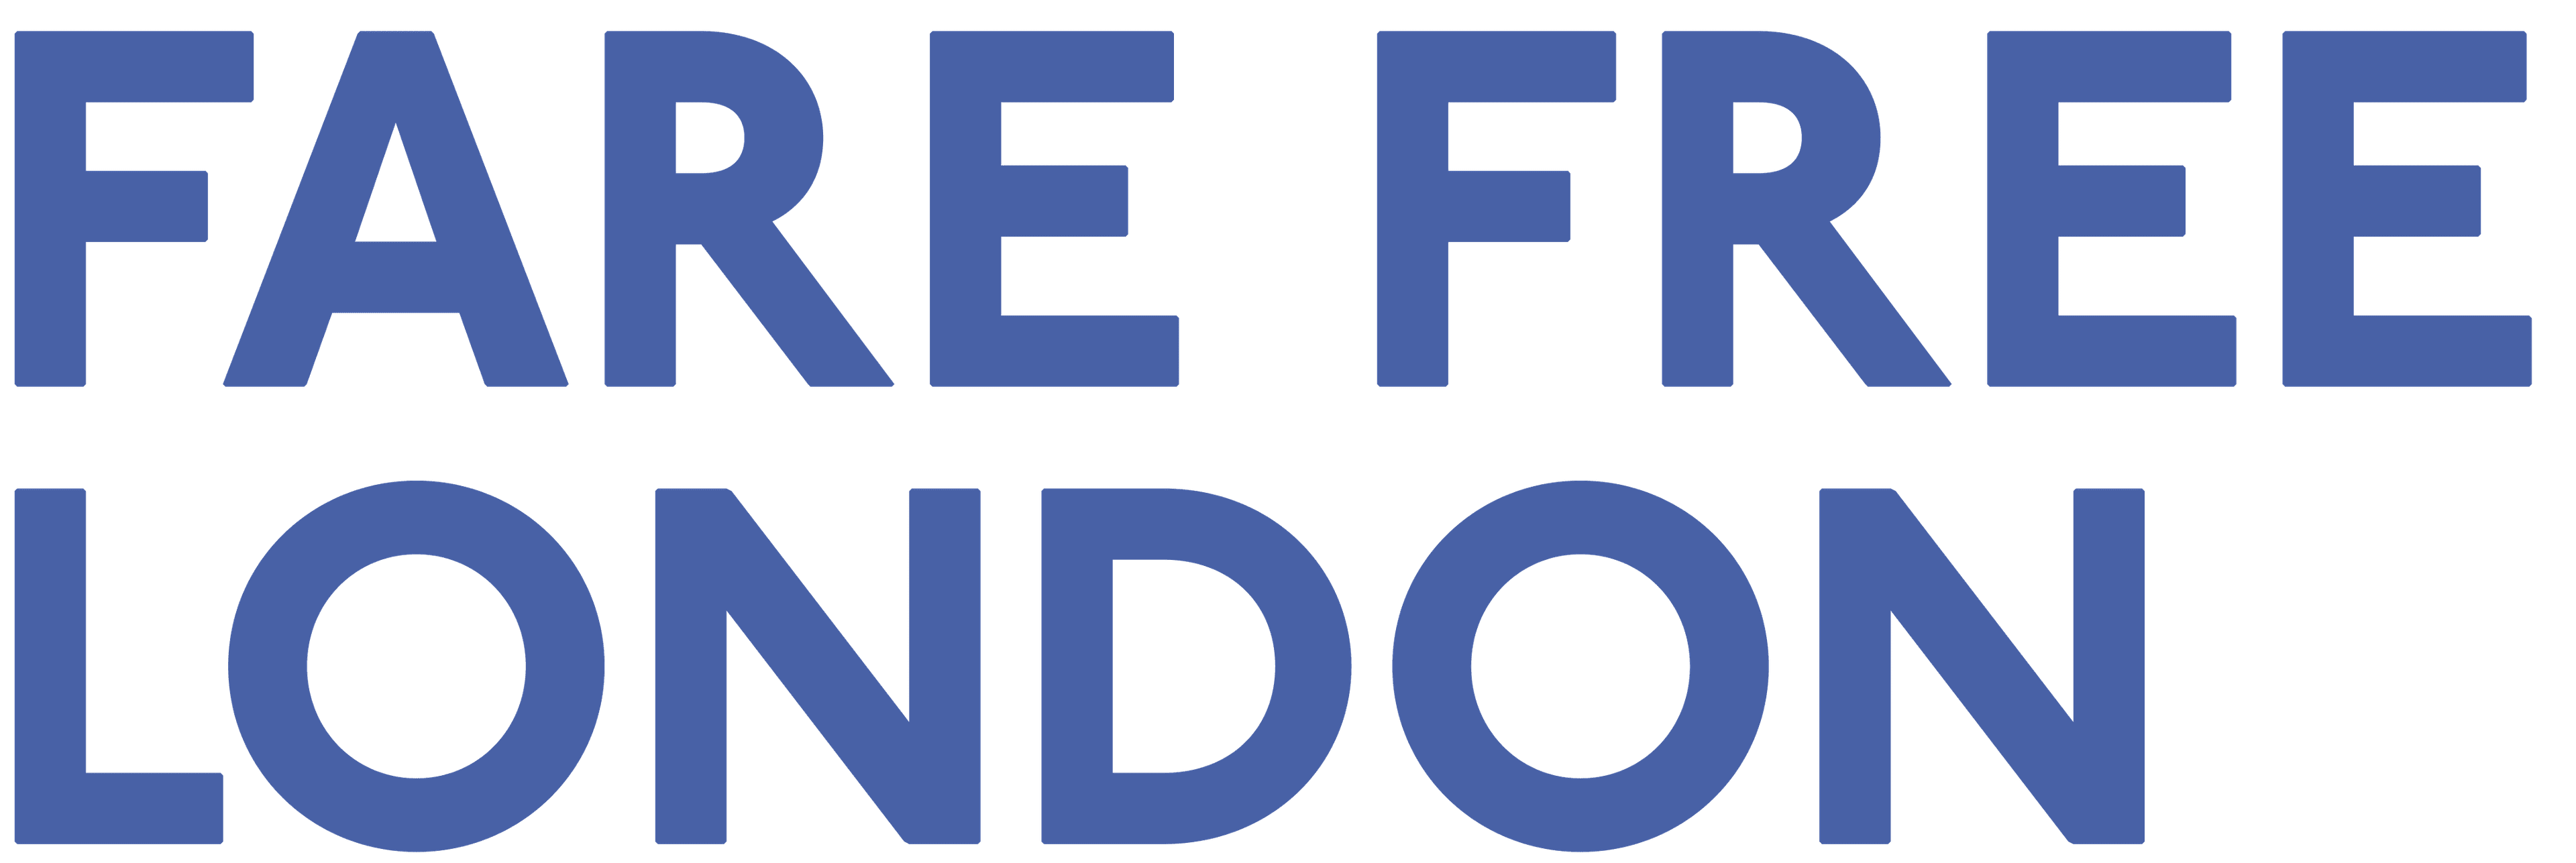 logo for fare free london, written in P22 Underground font